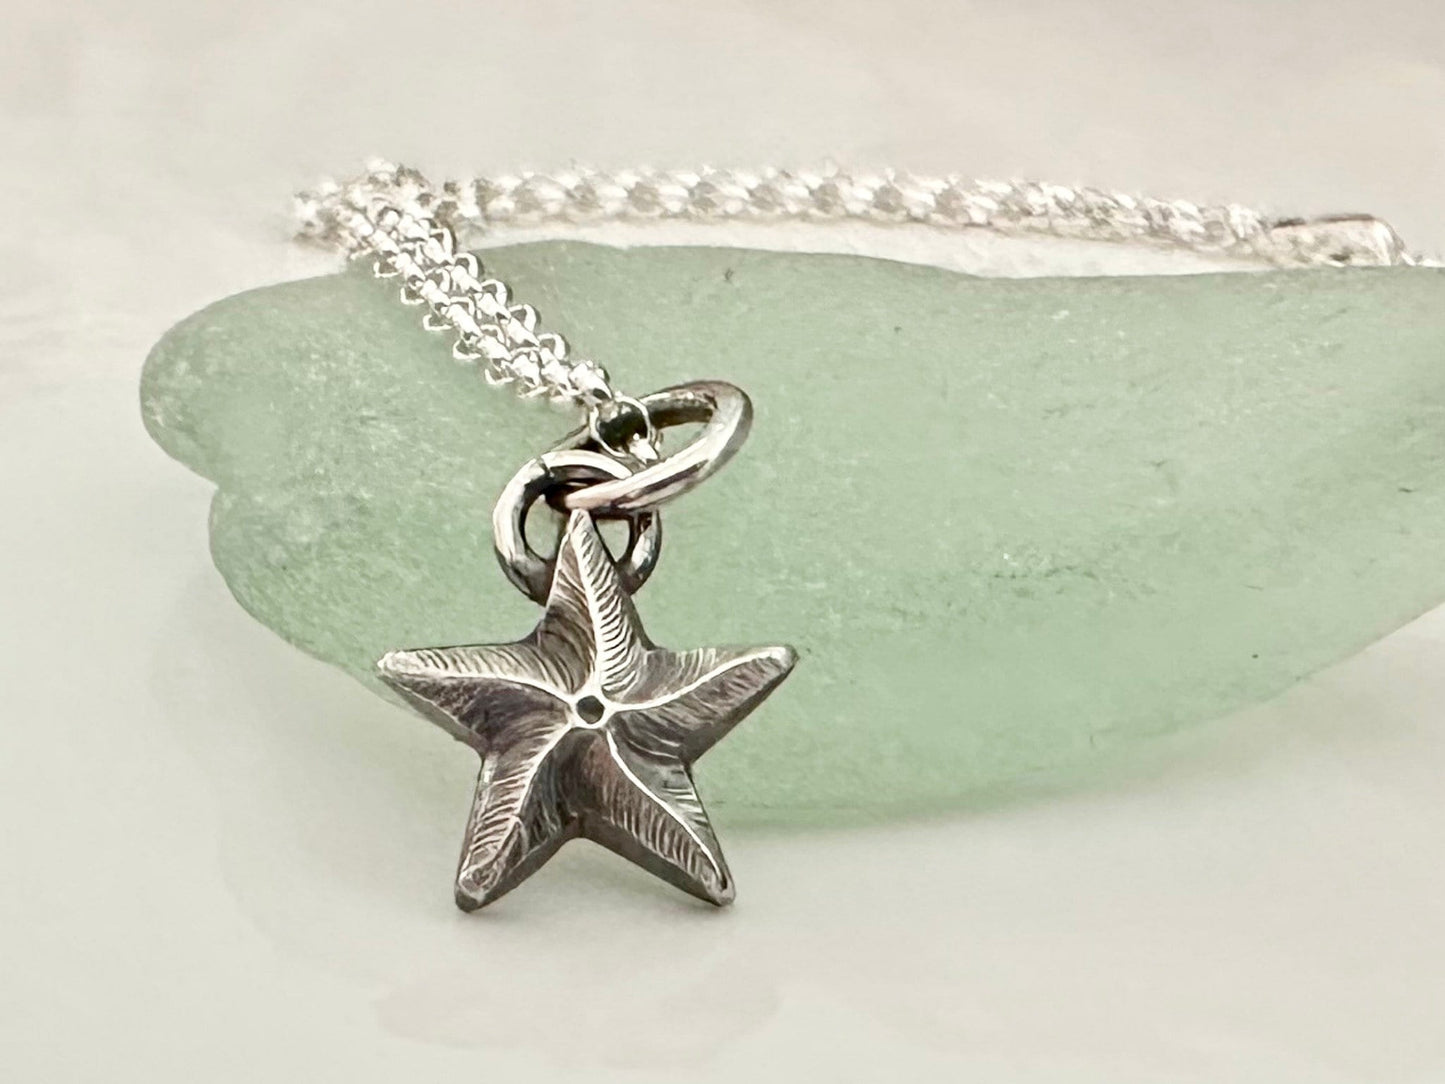 Rustic Sterling Silver Starfish pendant charm necklace, handmade from recycled 925 Sterling Silver, made to order